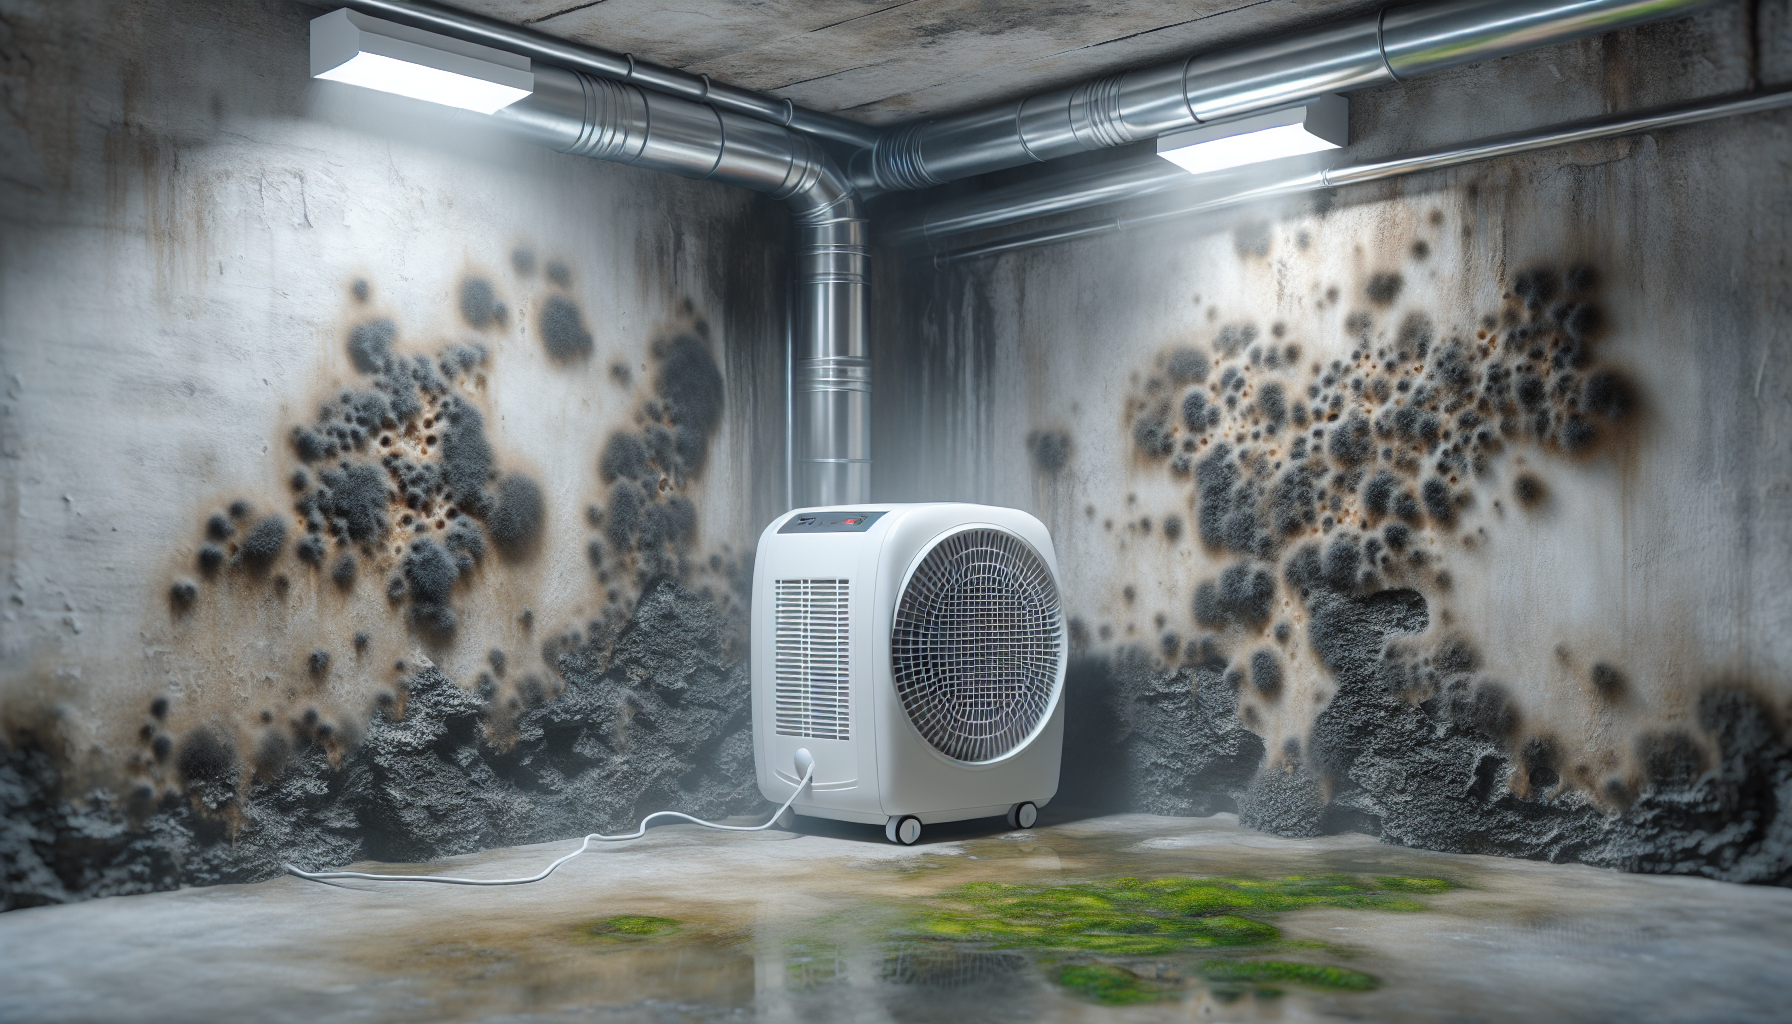 Tallahassee FL Mold Removal Services